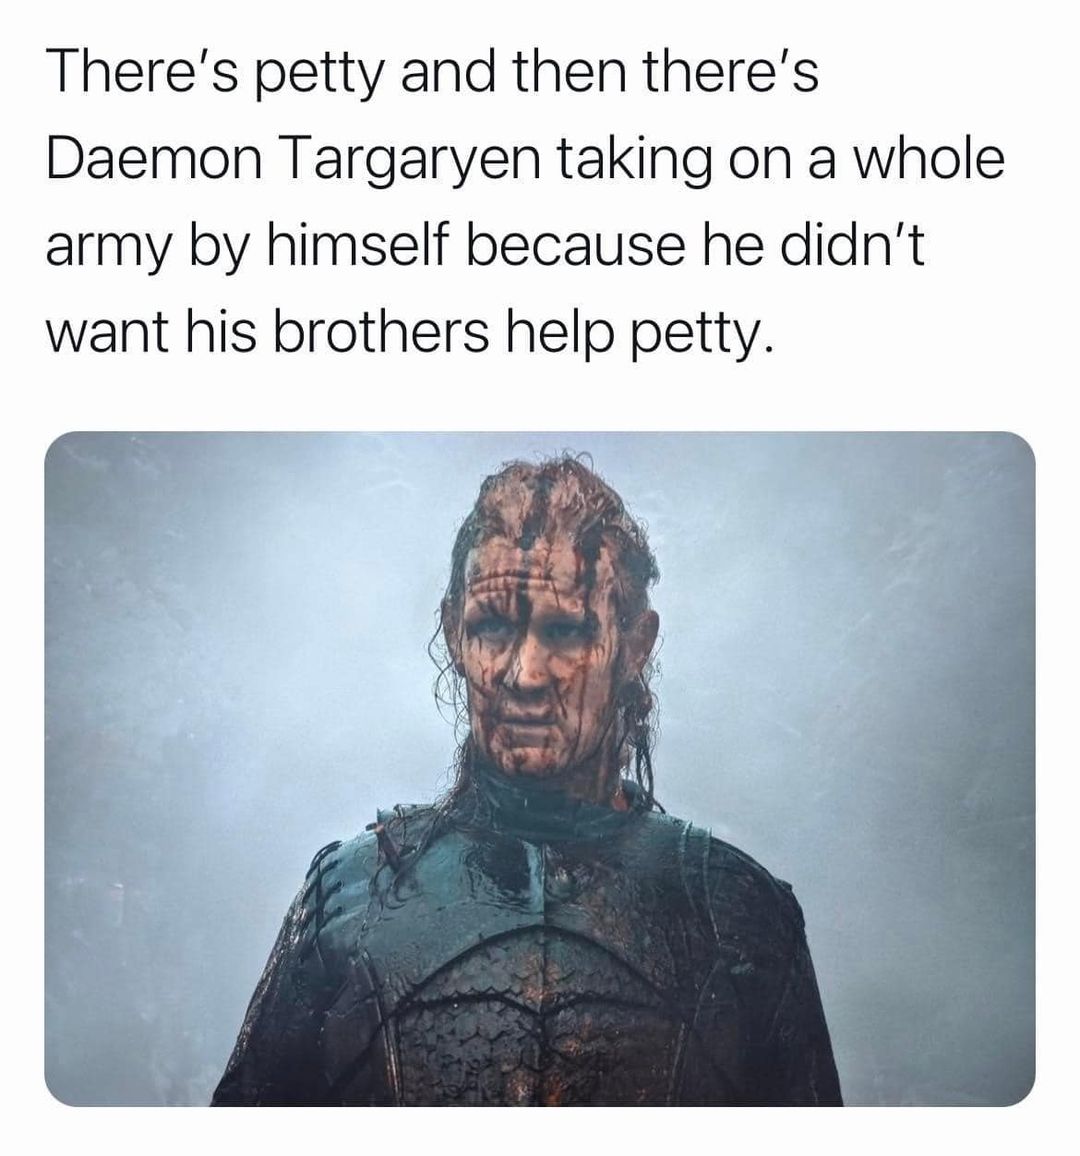 monday morning randomness -  human - There's petty and then there's Daemon Targaryen taking on a whole army by himself because he didn't want his brothers help petty.